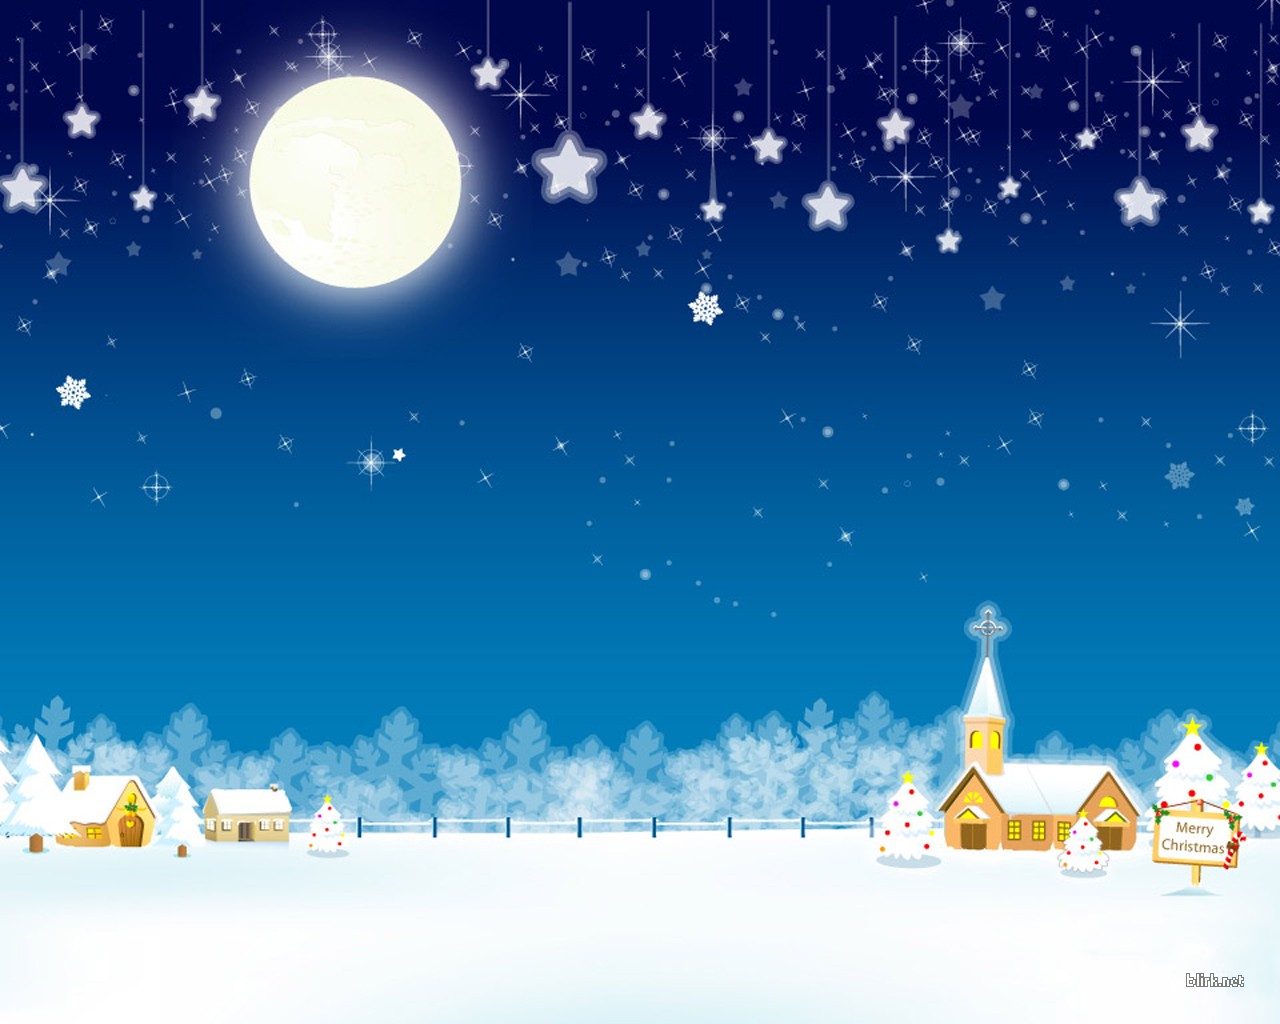 Christmas Snow Wallpaper 9694 Hd Wallpapers in Celebrations   Imagesci